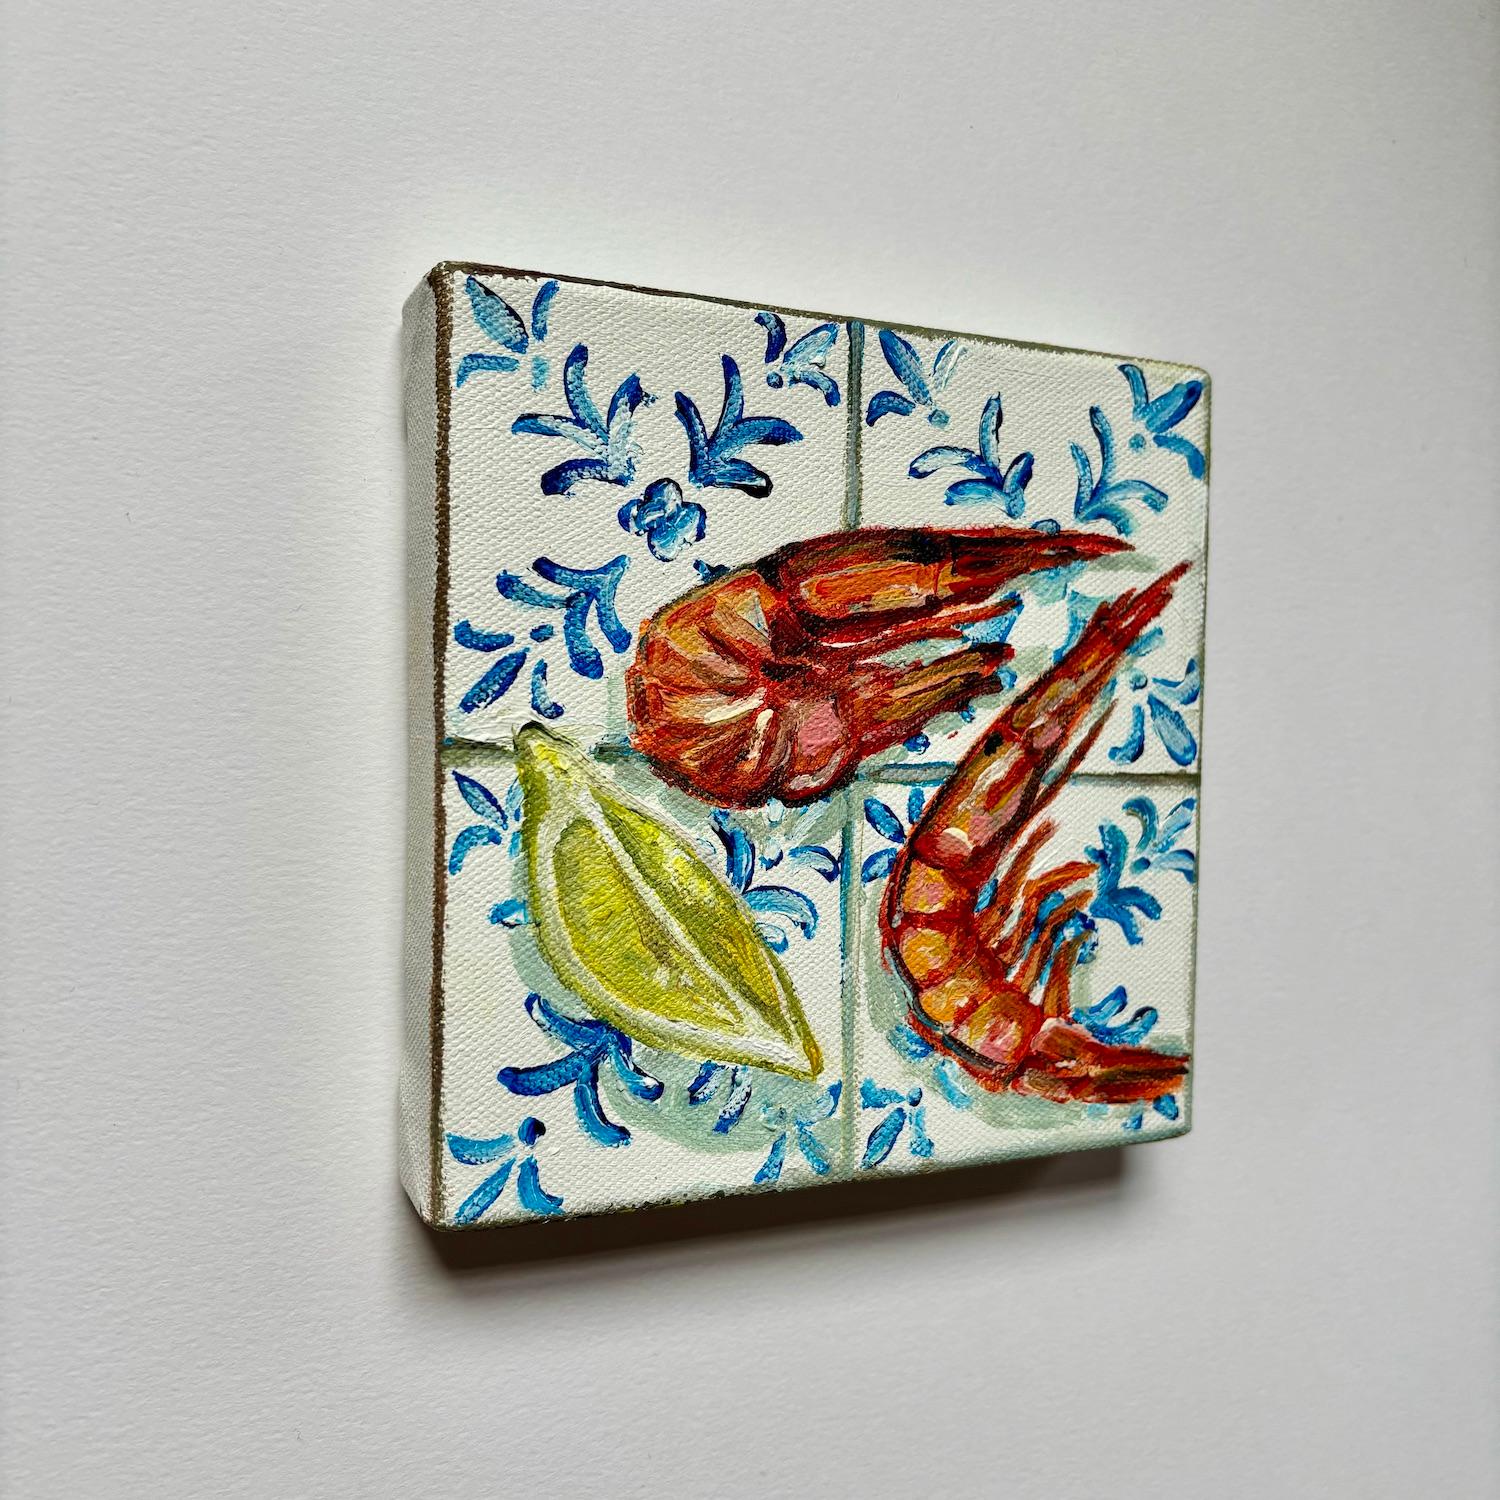 This contemporary still-life depicts two vibrant and juicy prawns with a lemon wedge on blue and white Mediterranean tiles. This box canvas is part of my MINI Tiles series, and is ready to be hung unframed. Inspired by my Abuela's home kitchen.